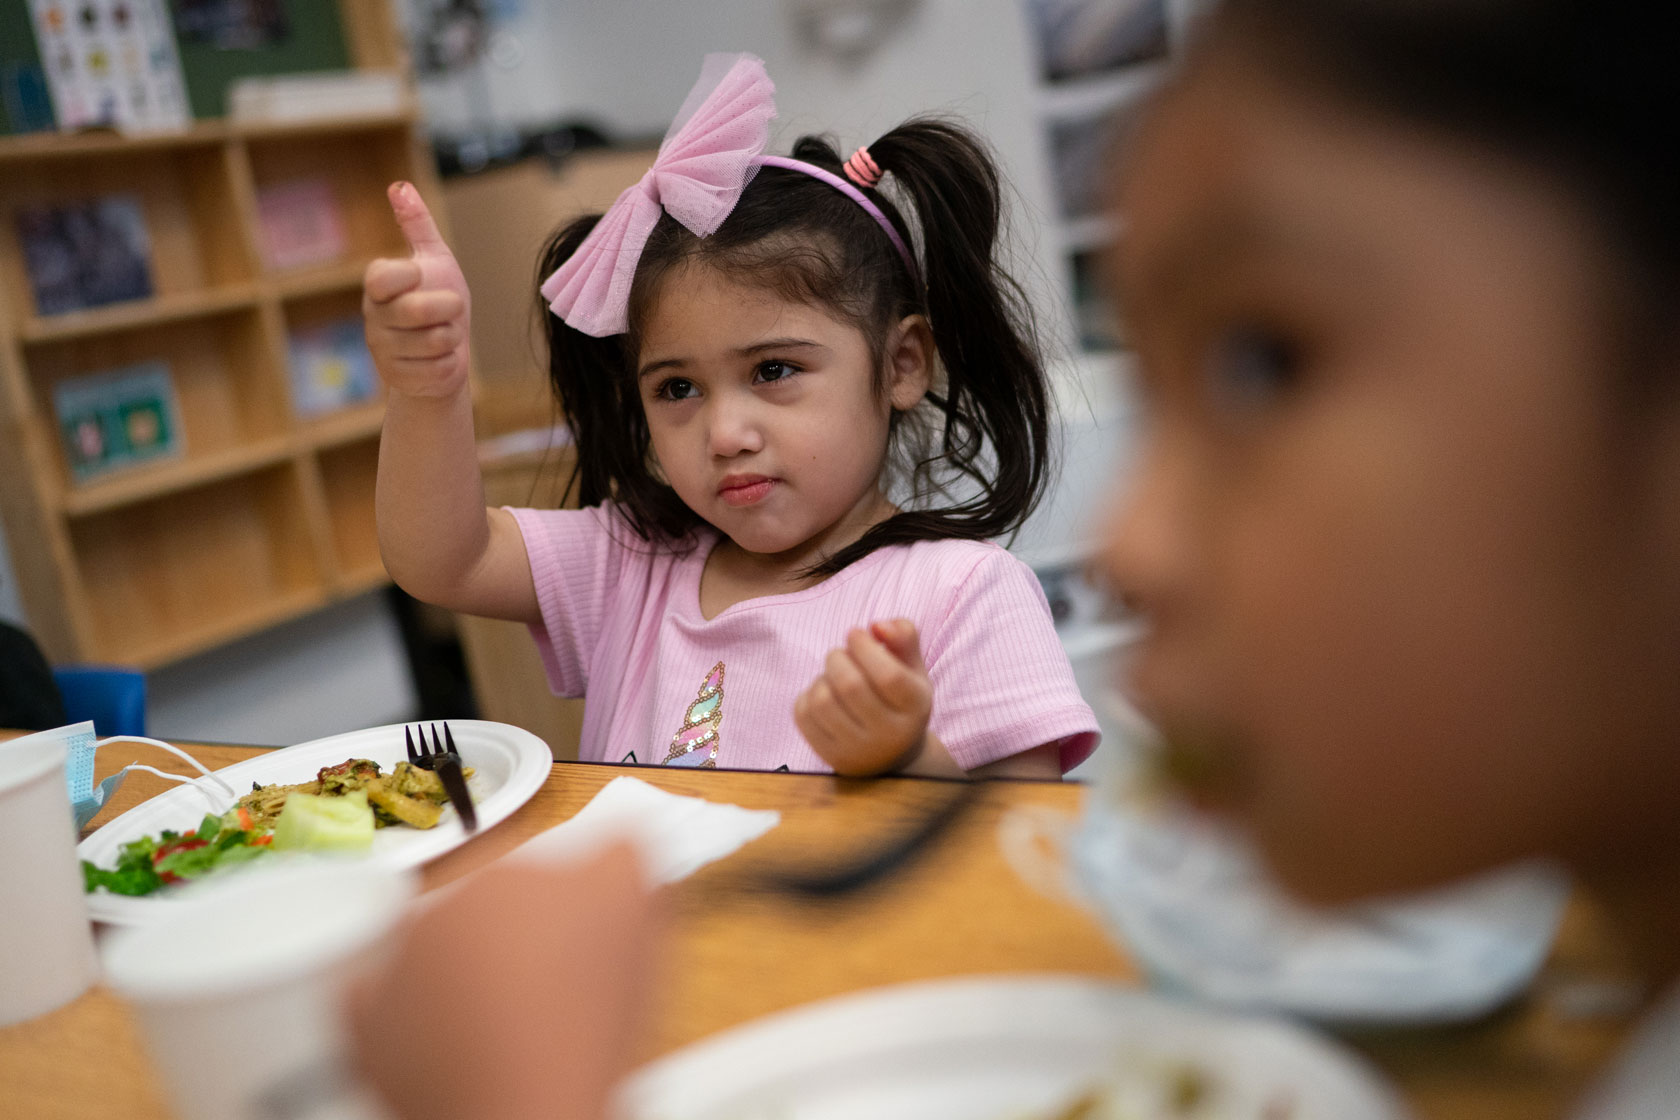 A young student gives a thumbs up when asked about her healthy lunch.